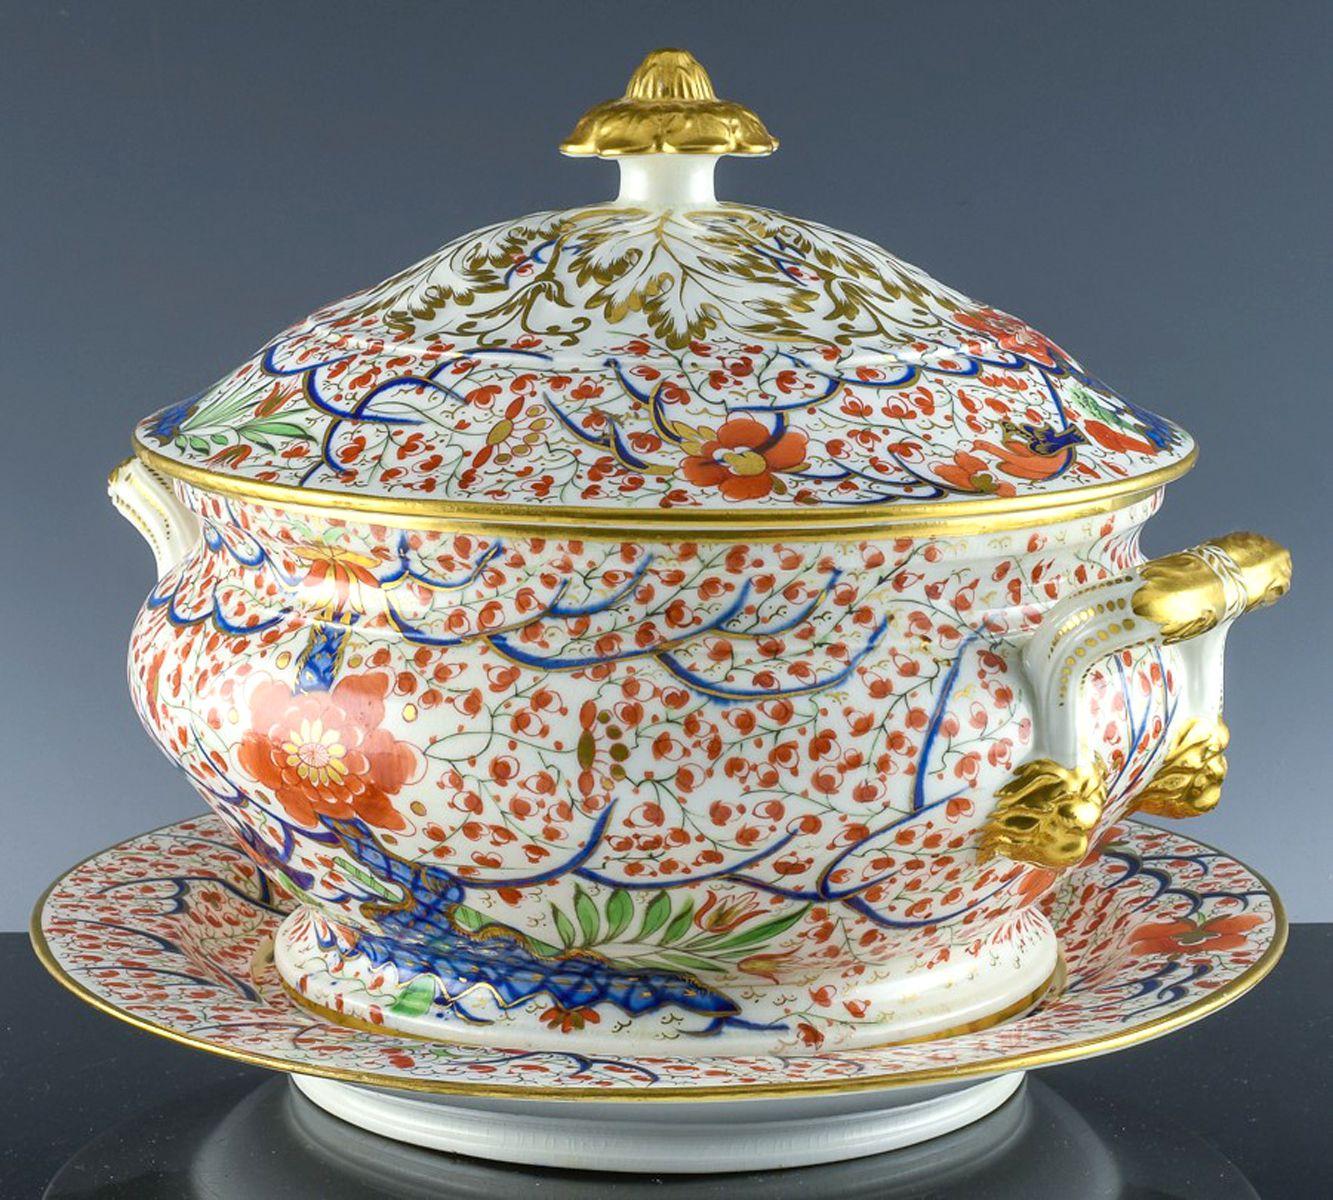 19th Century Regency Period Chamberlain Worcester Porcelain Soup Tureen, Cover and Stand For Sale